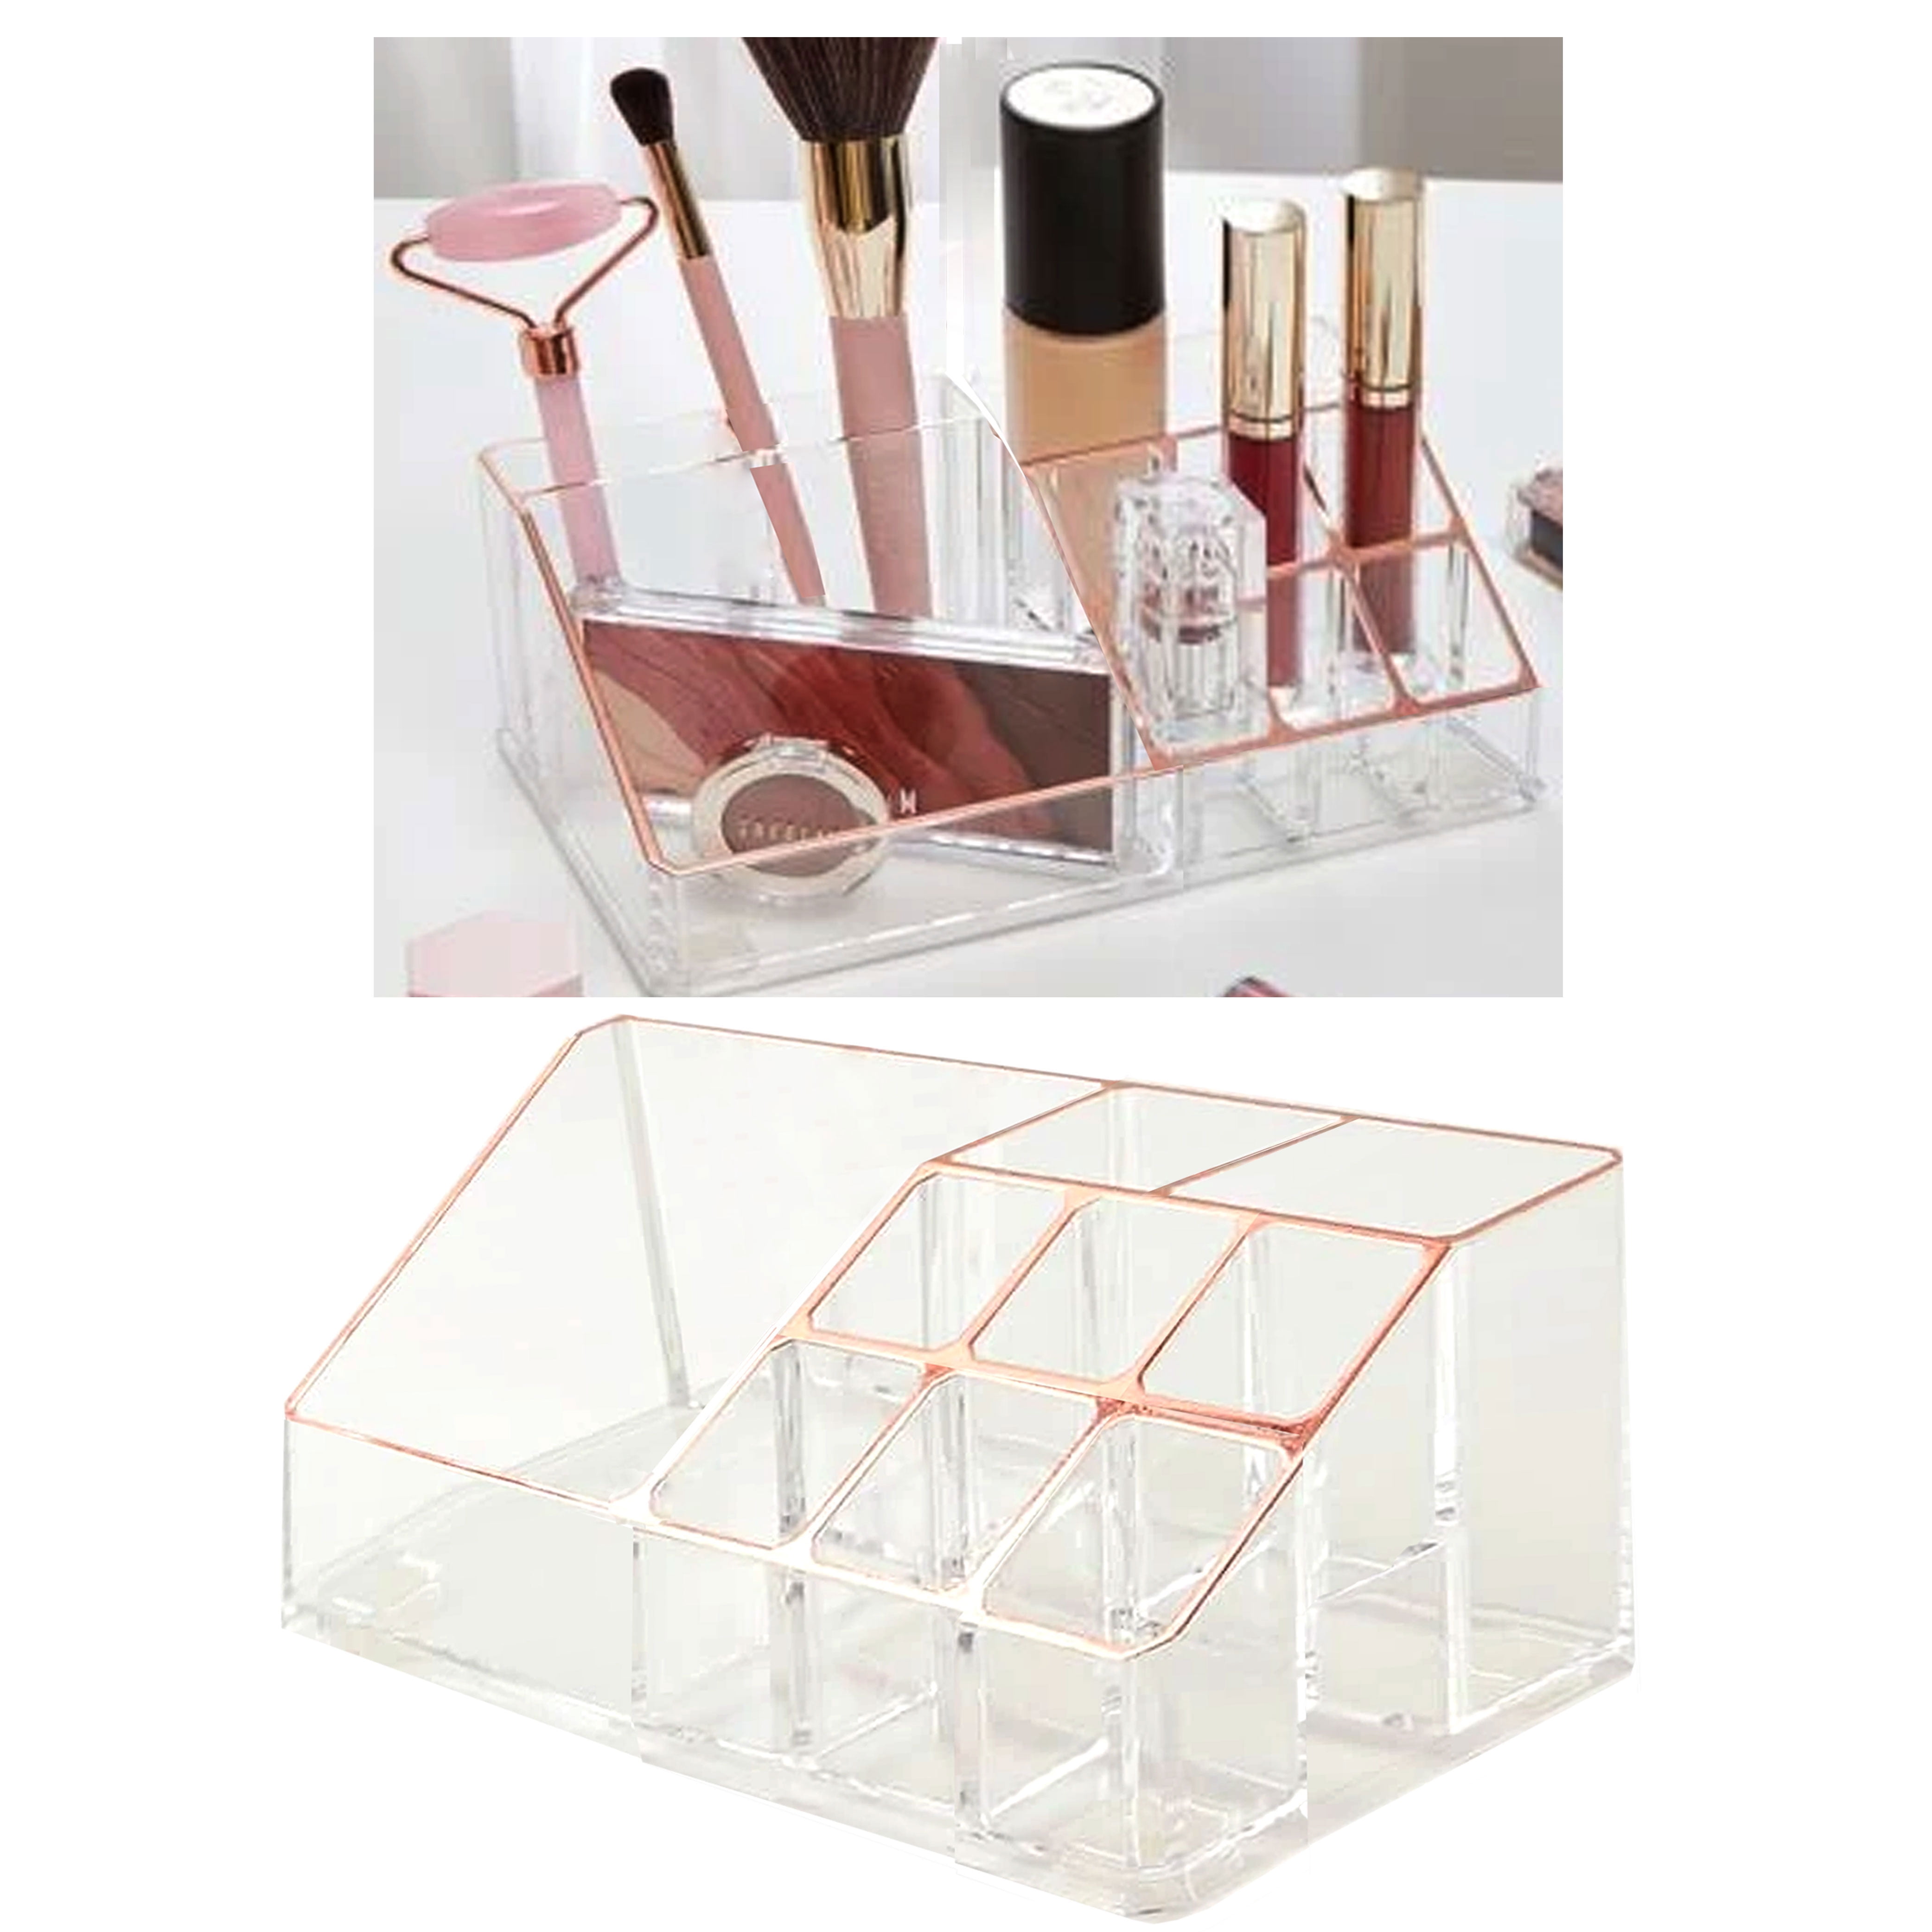 BeautyZone Nail Polish Organizer Clear Acrylic Makeup Storage For Manicure  Tools And Lipsticks, Compact Design With Multiple Compartments And Easy  Access, Perfect For Home And Salon Use. From Deng10, $16.35